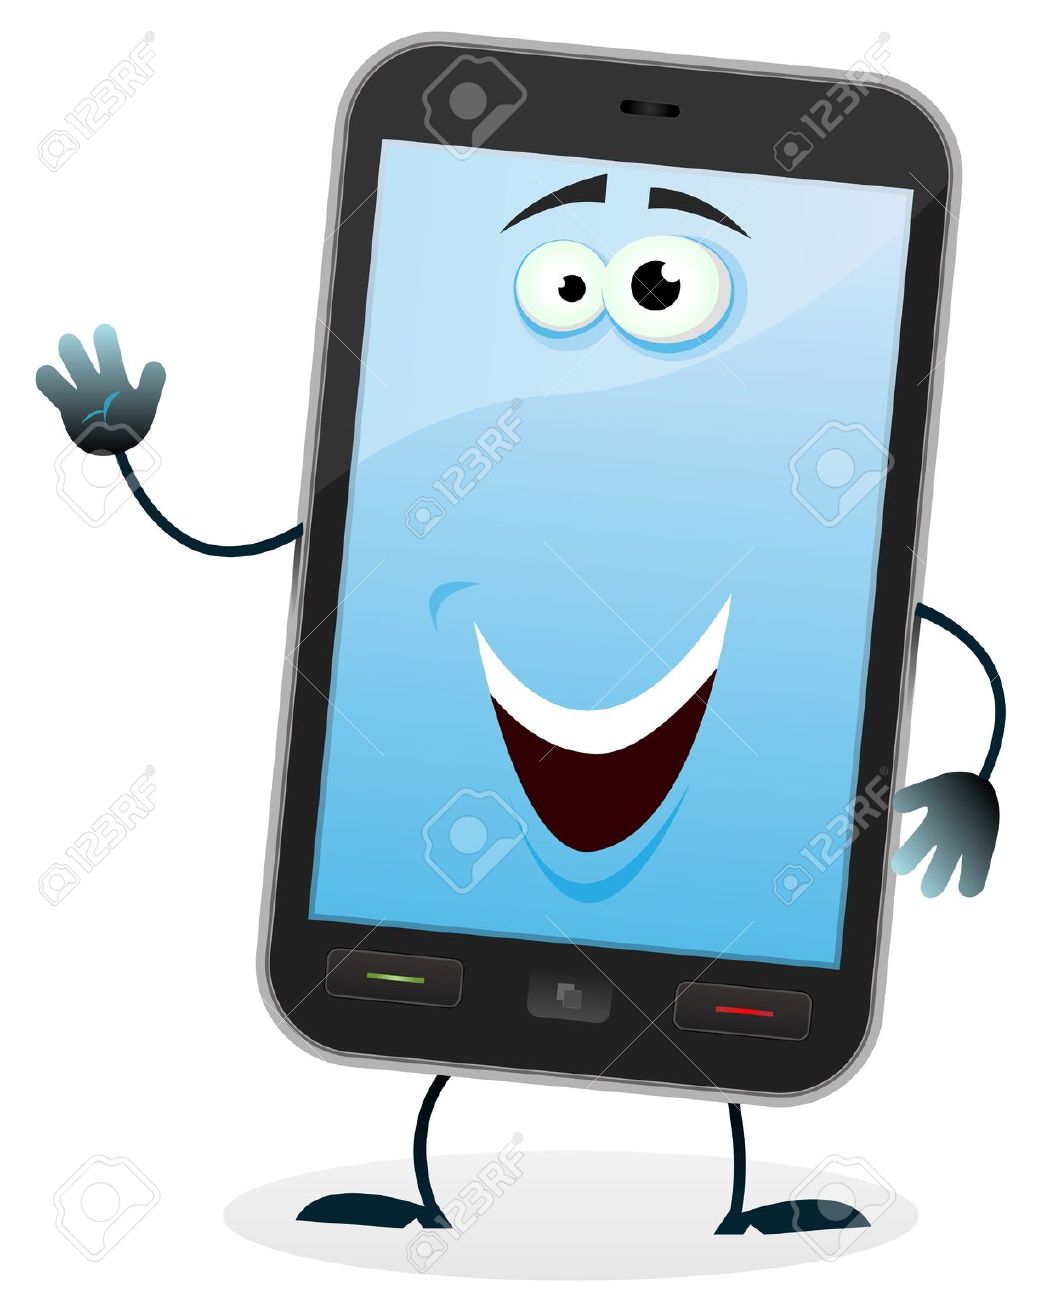 15032025 illustration of a cartoon happy mobile phone character doing welcoming sign stock vector